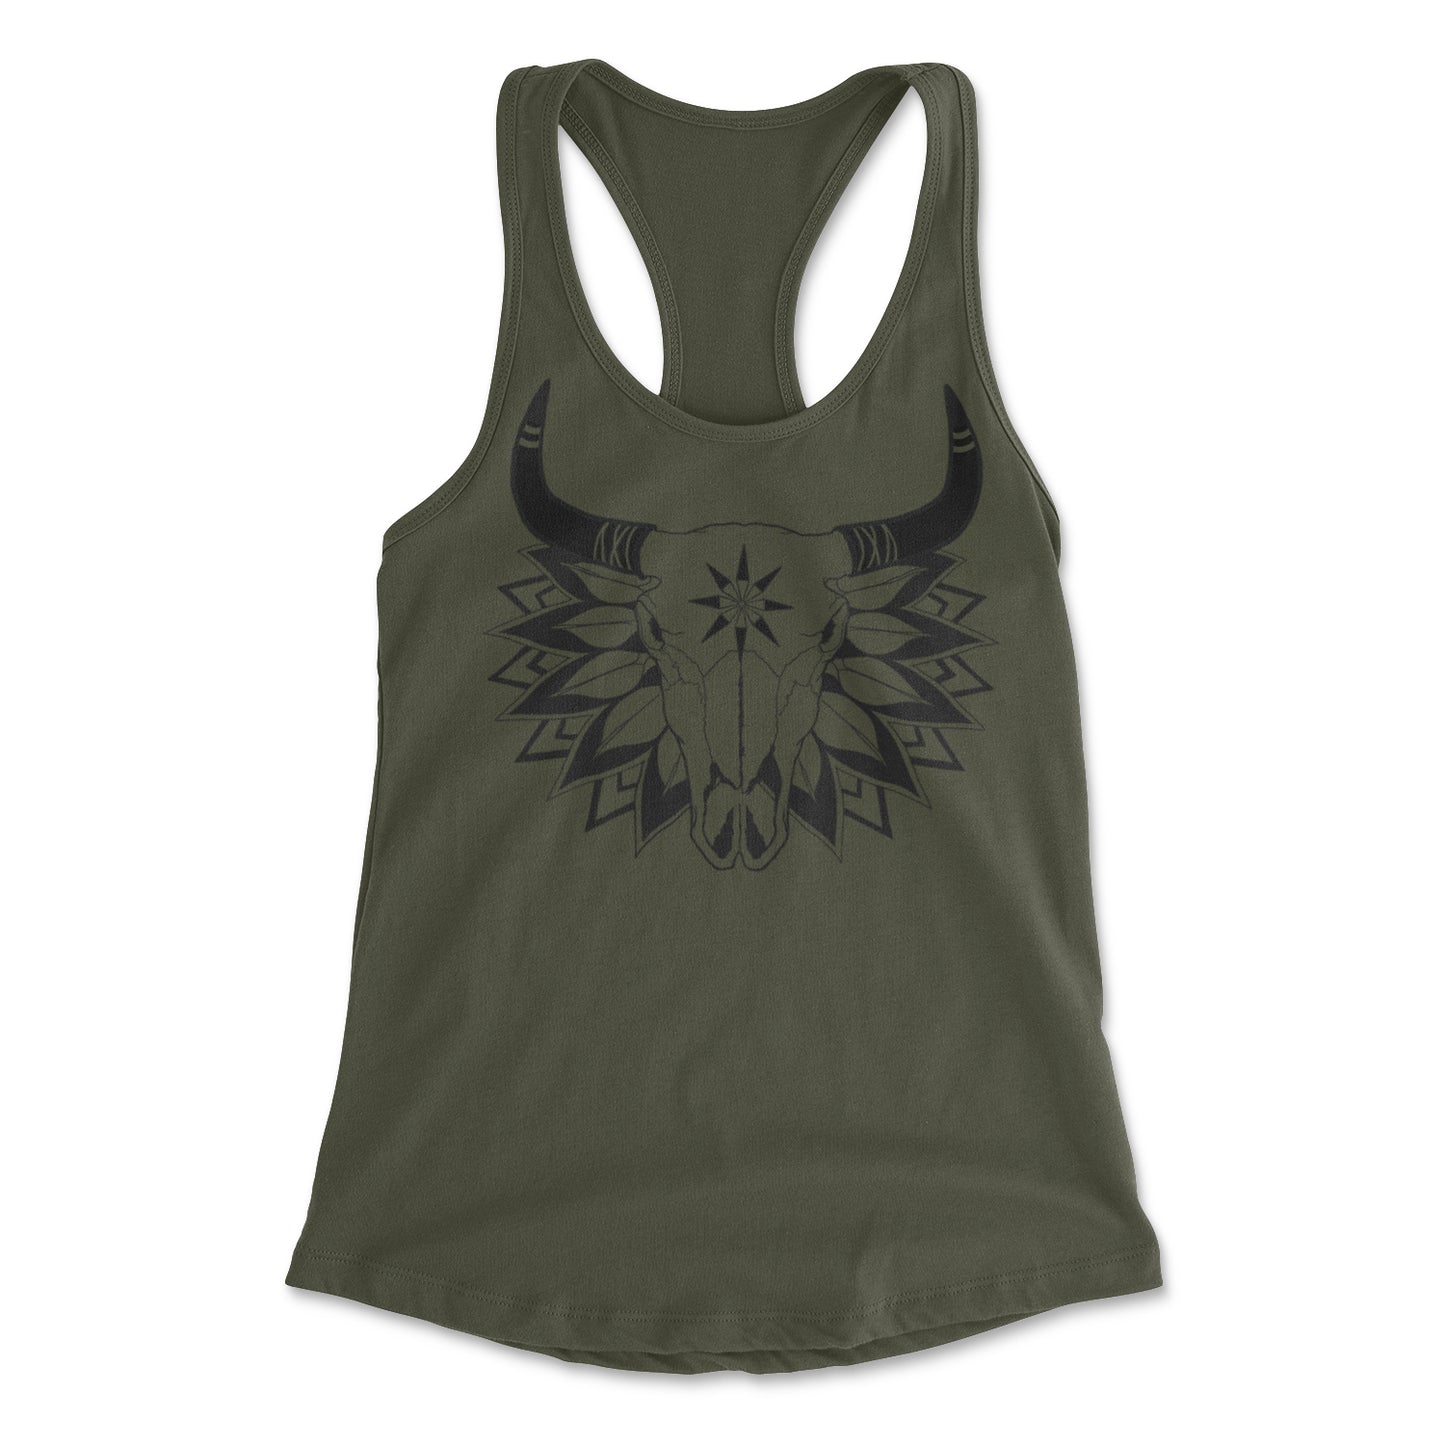 Cow Skull Tank (FITTED)